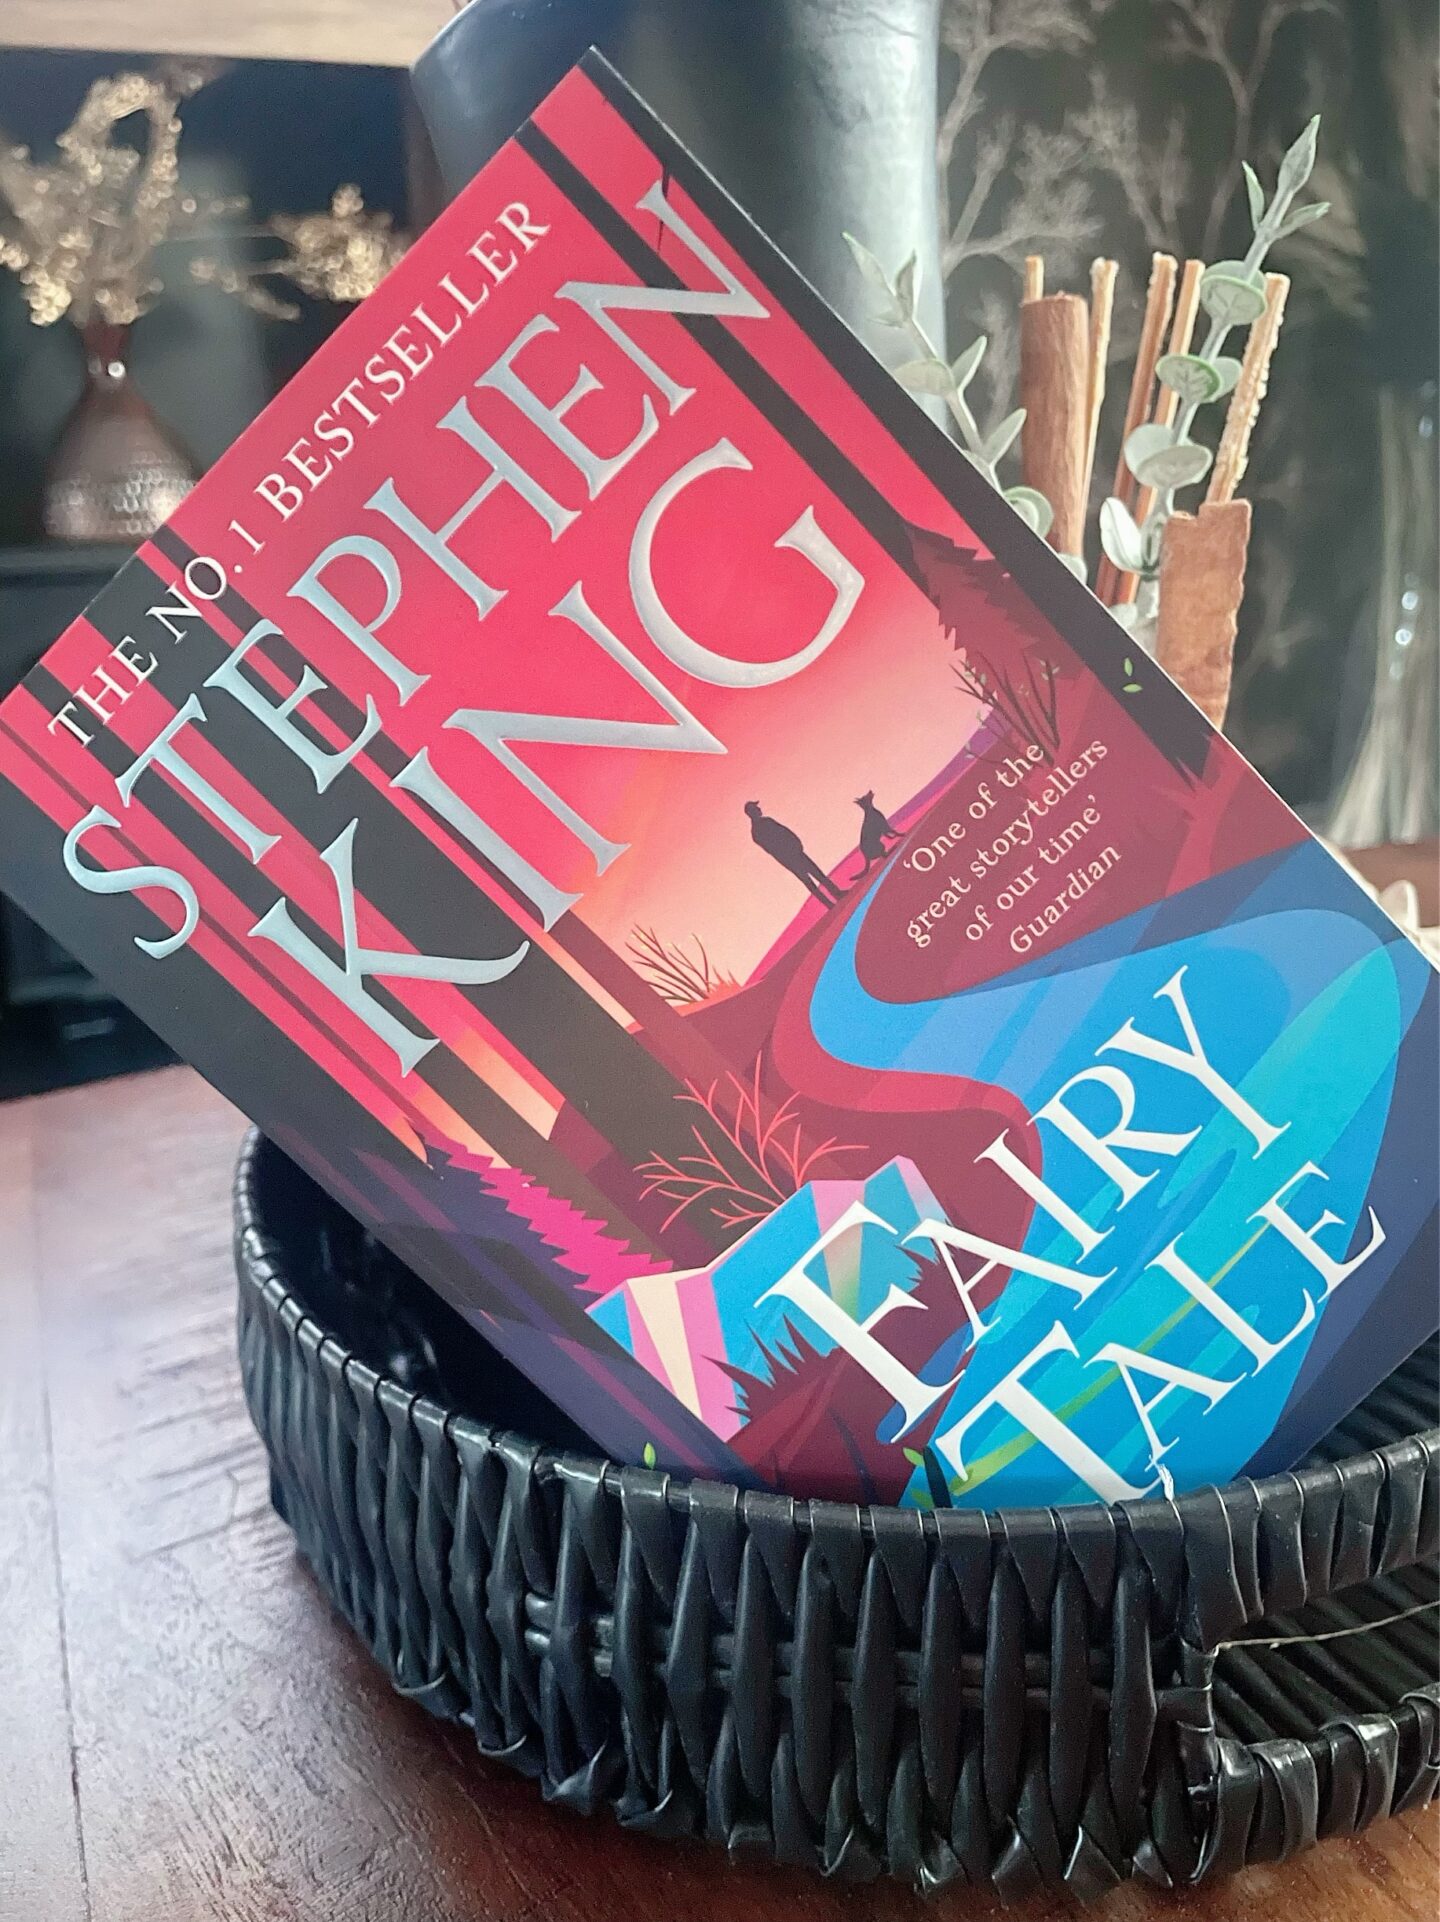 Fairytale by Stephen King – A Spoiler Free Review